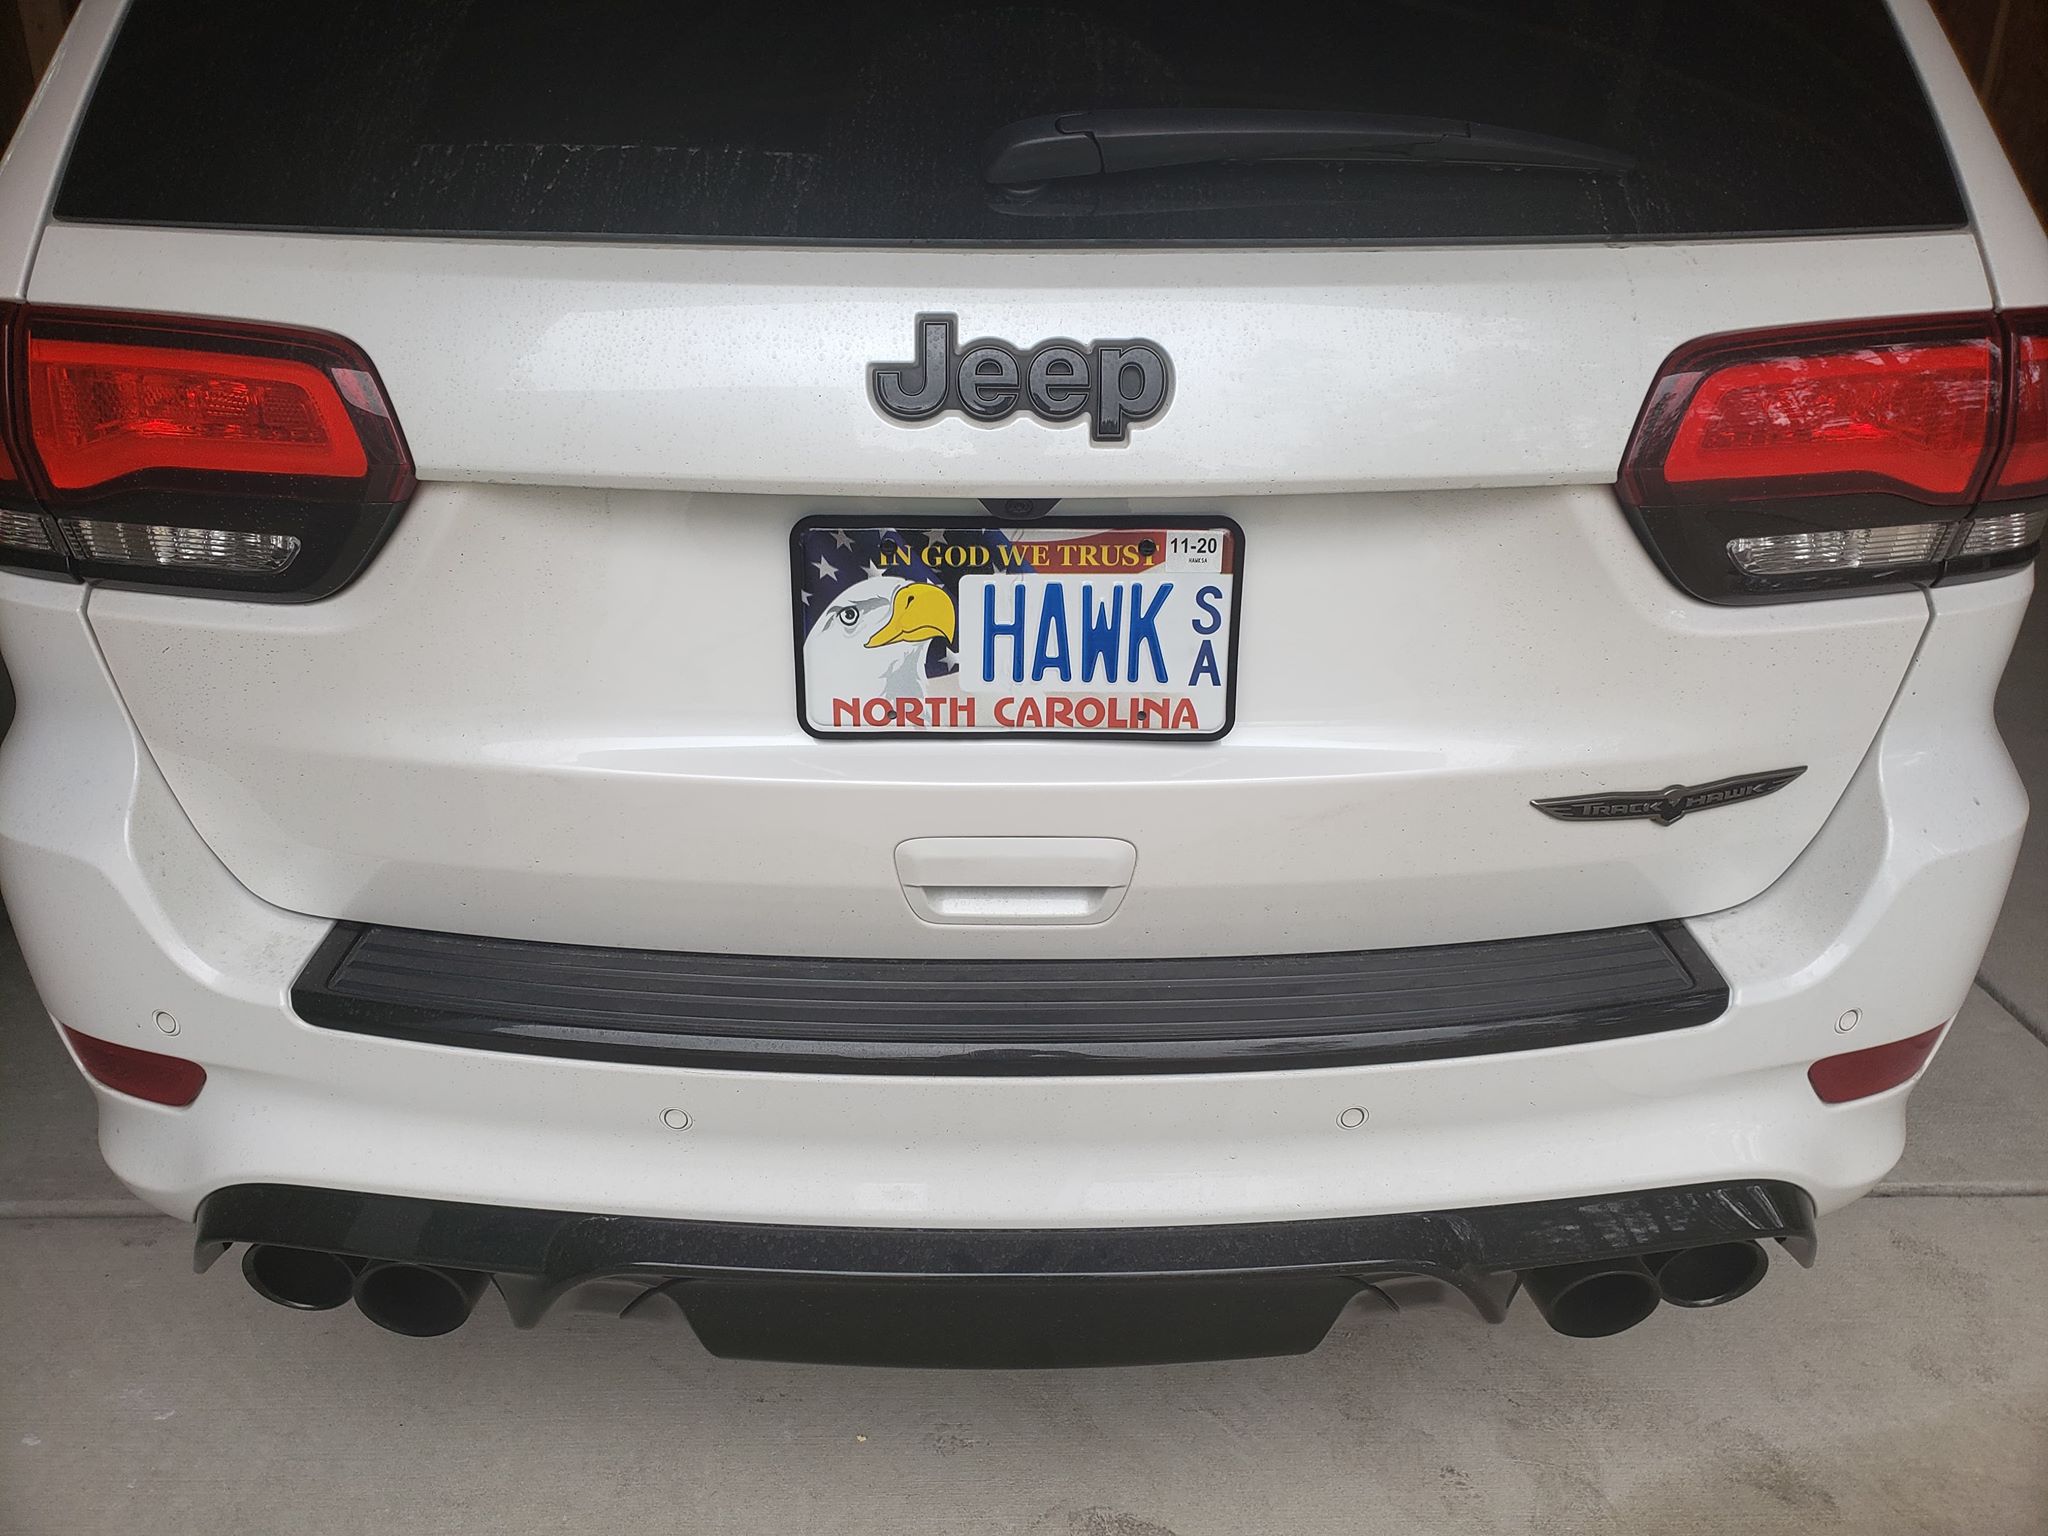 Jeep Personalize License Plates